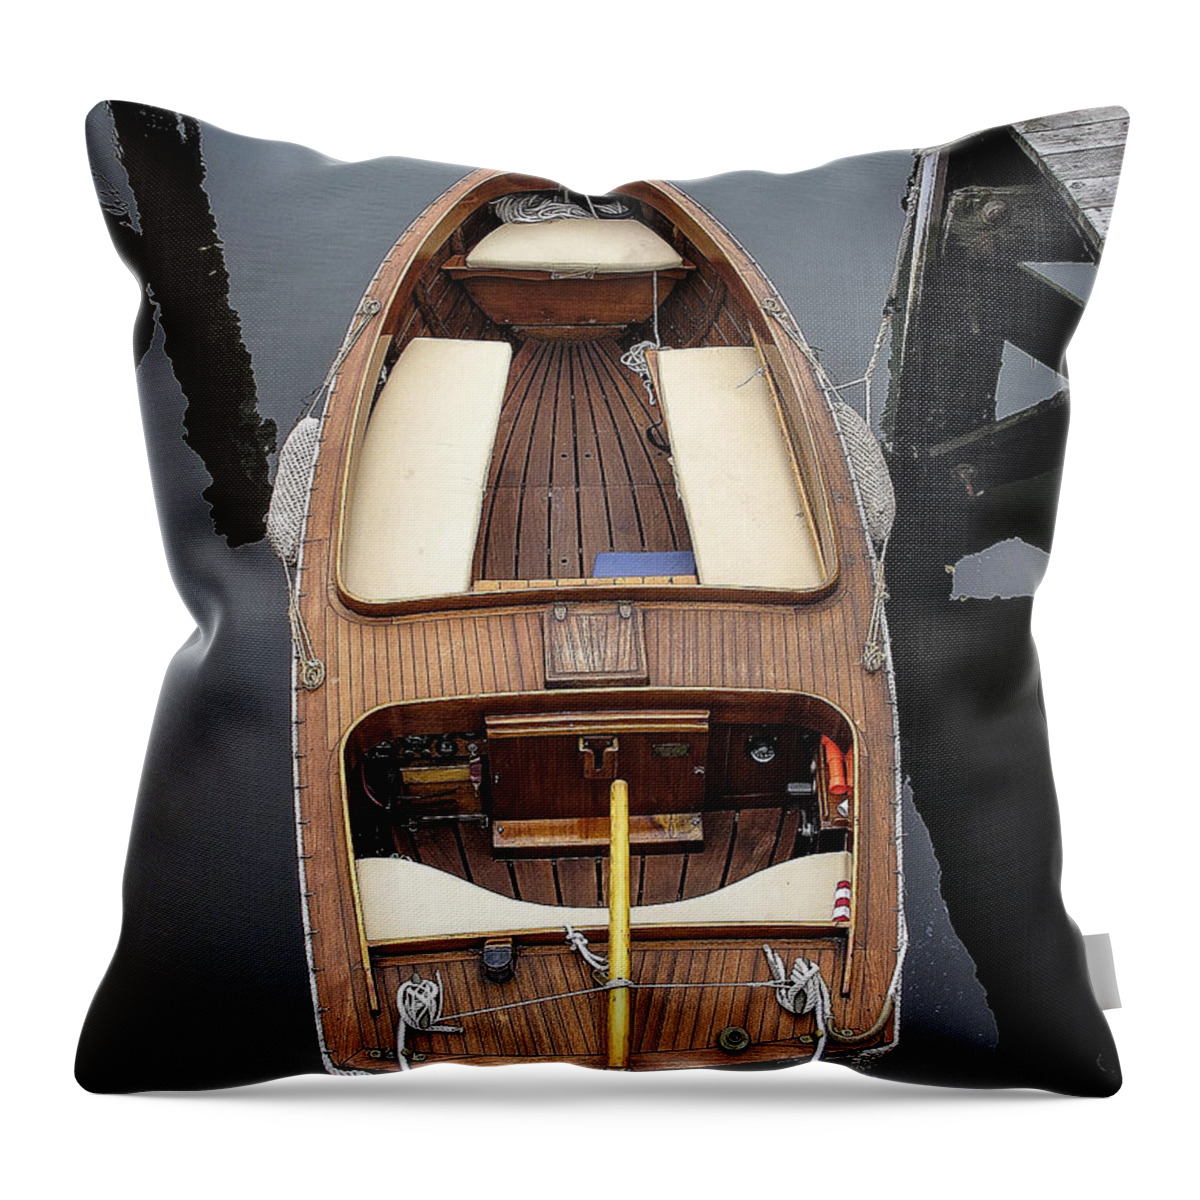 Fishing Throw Pillow featuring the photograph Wood Boat Nantucket by Mark Peavy